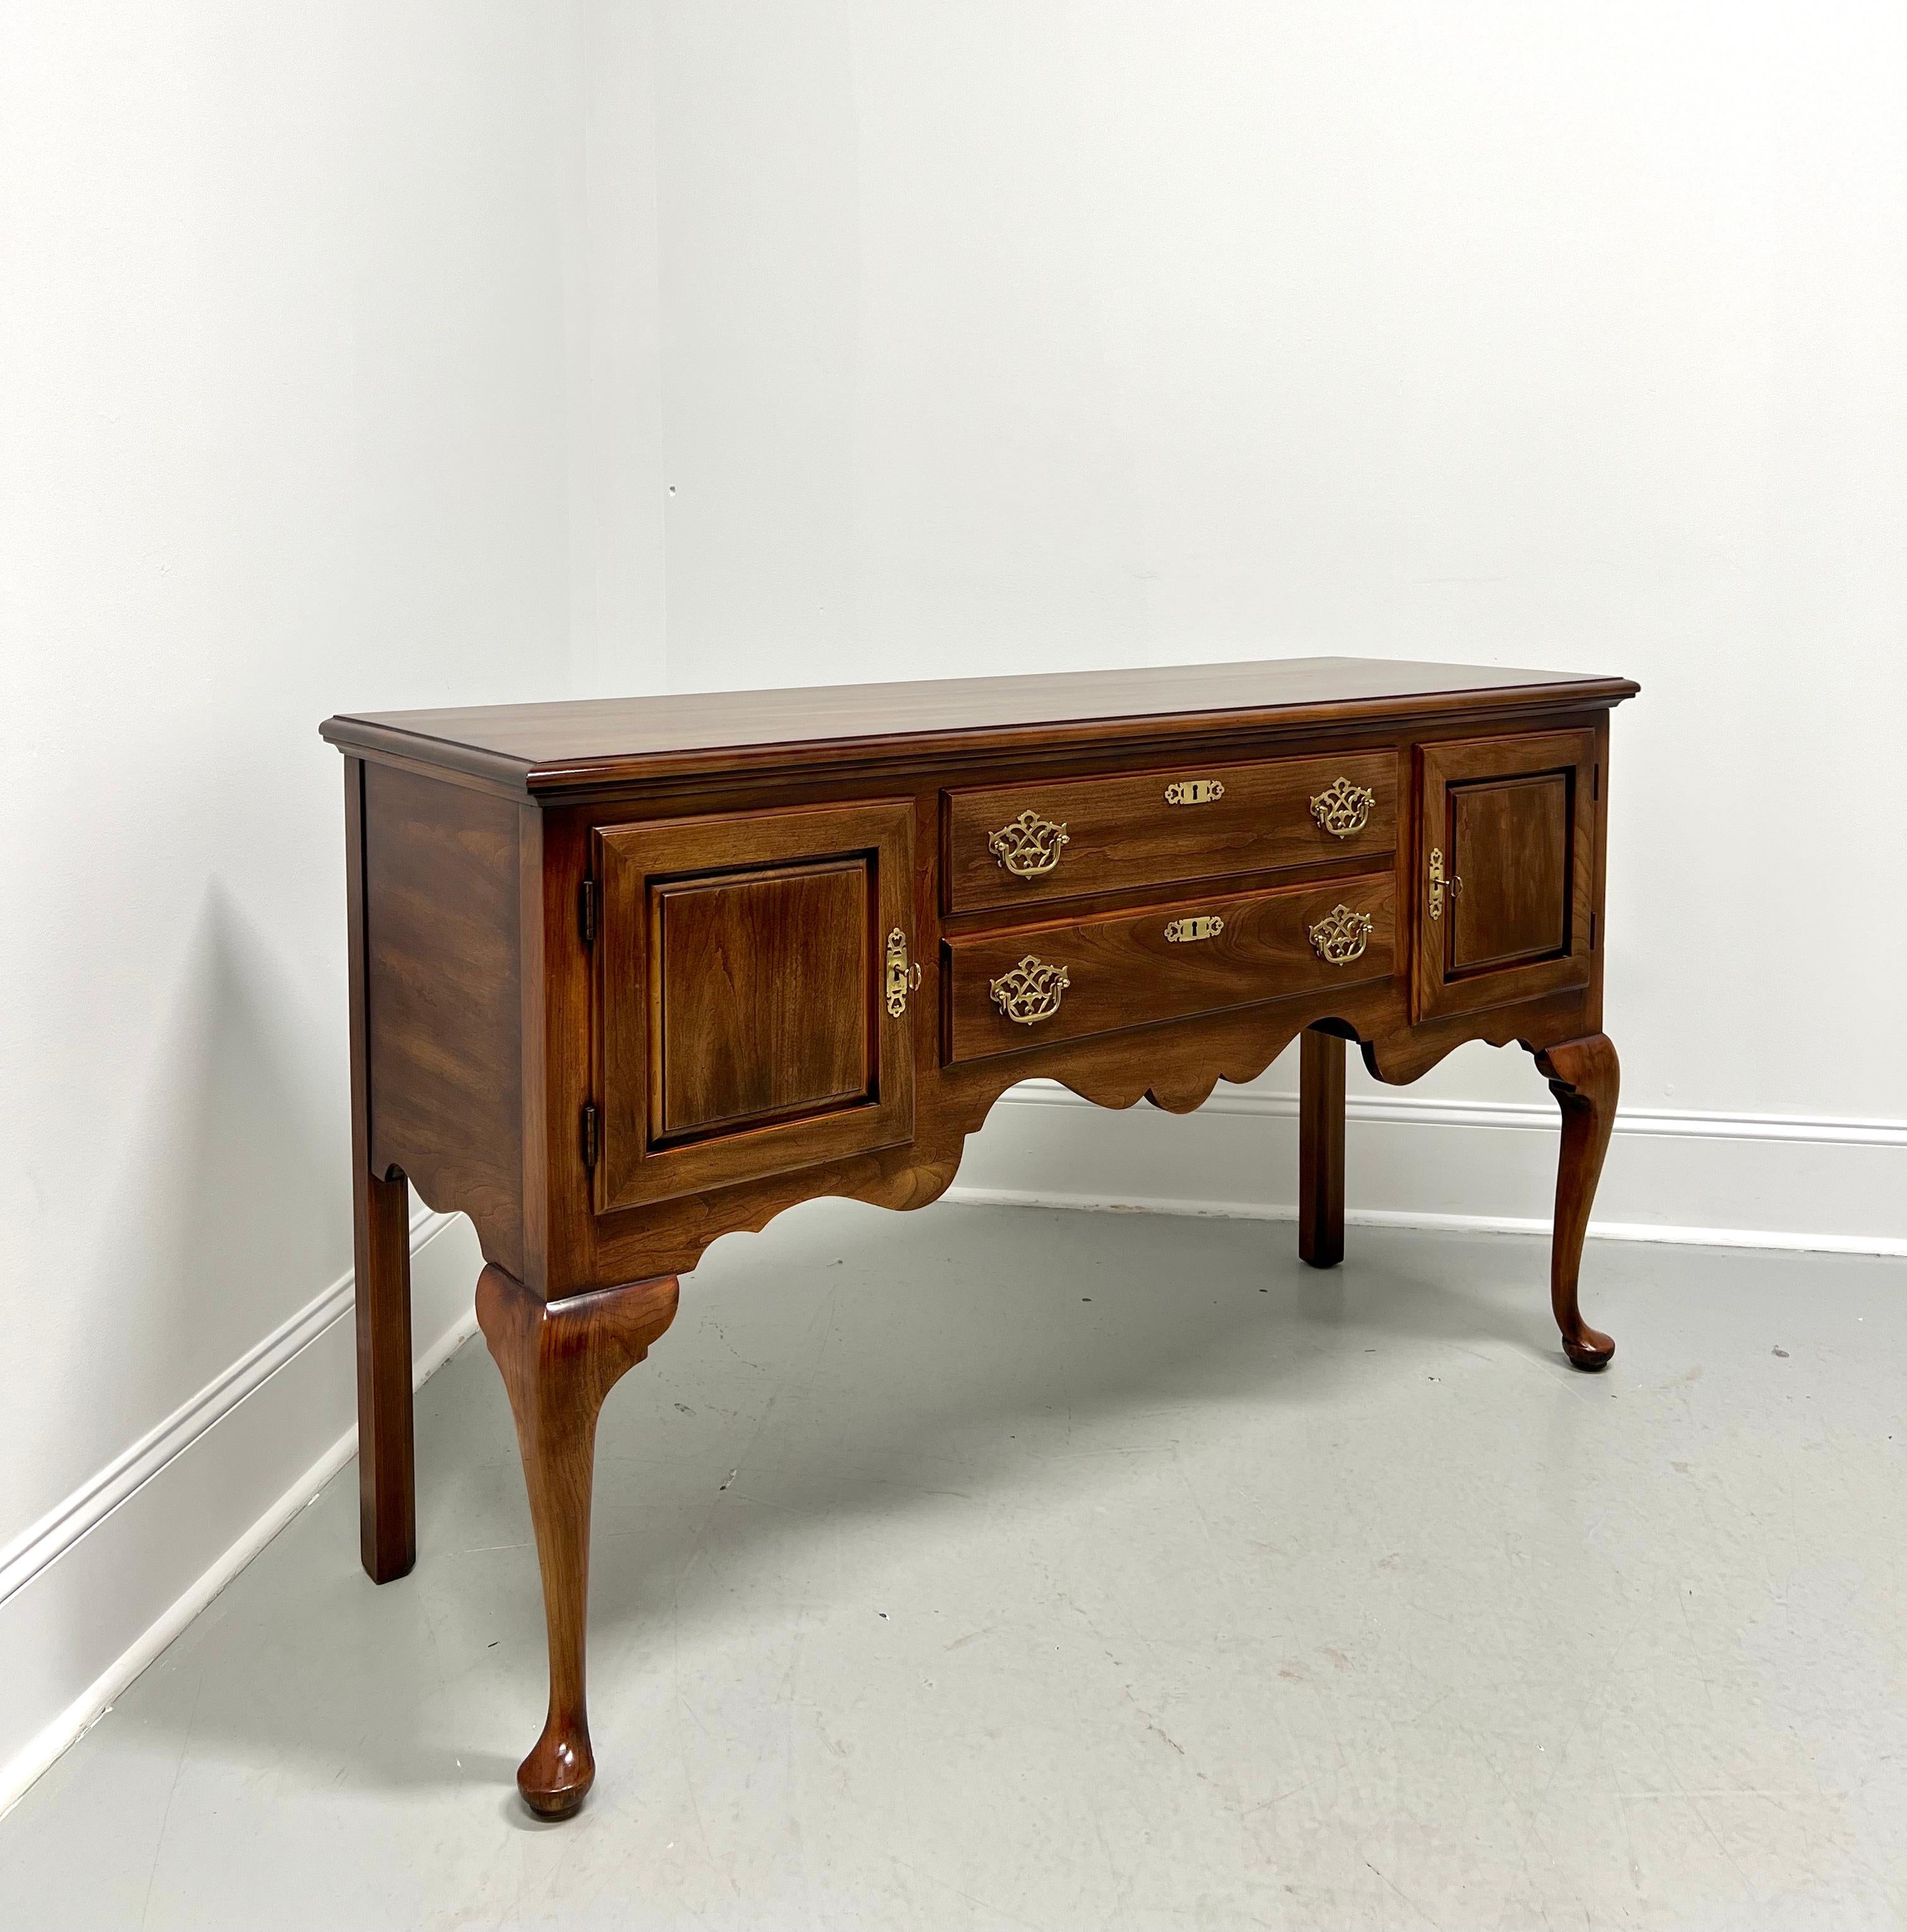 STATTON Trutype Americana Oxford Antique Cherry Queen Anne Huntboard Sideboard For Sale 9